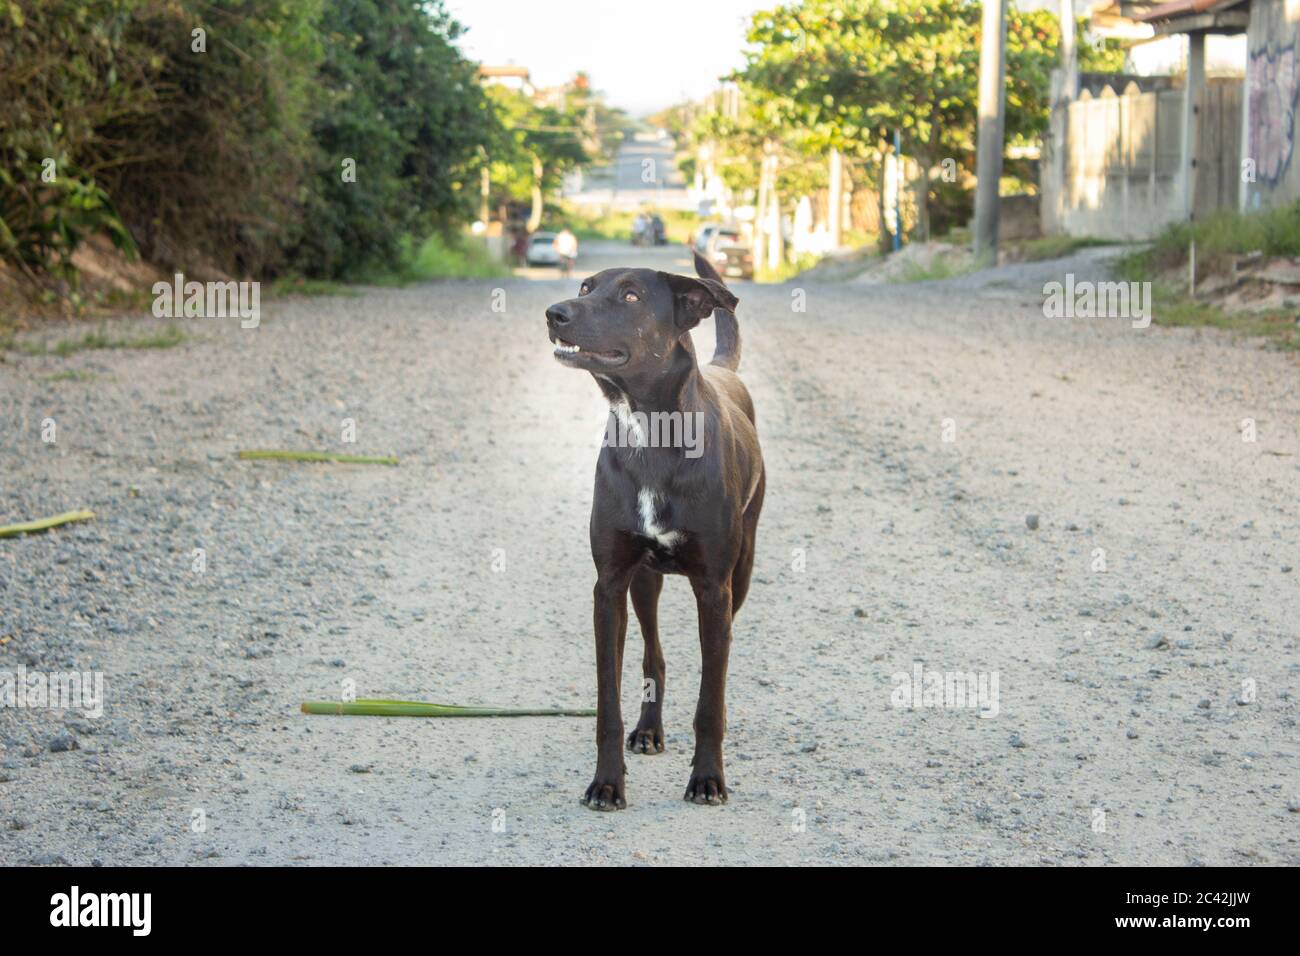 Black dog walking on a gravel road in the city Stock Photo